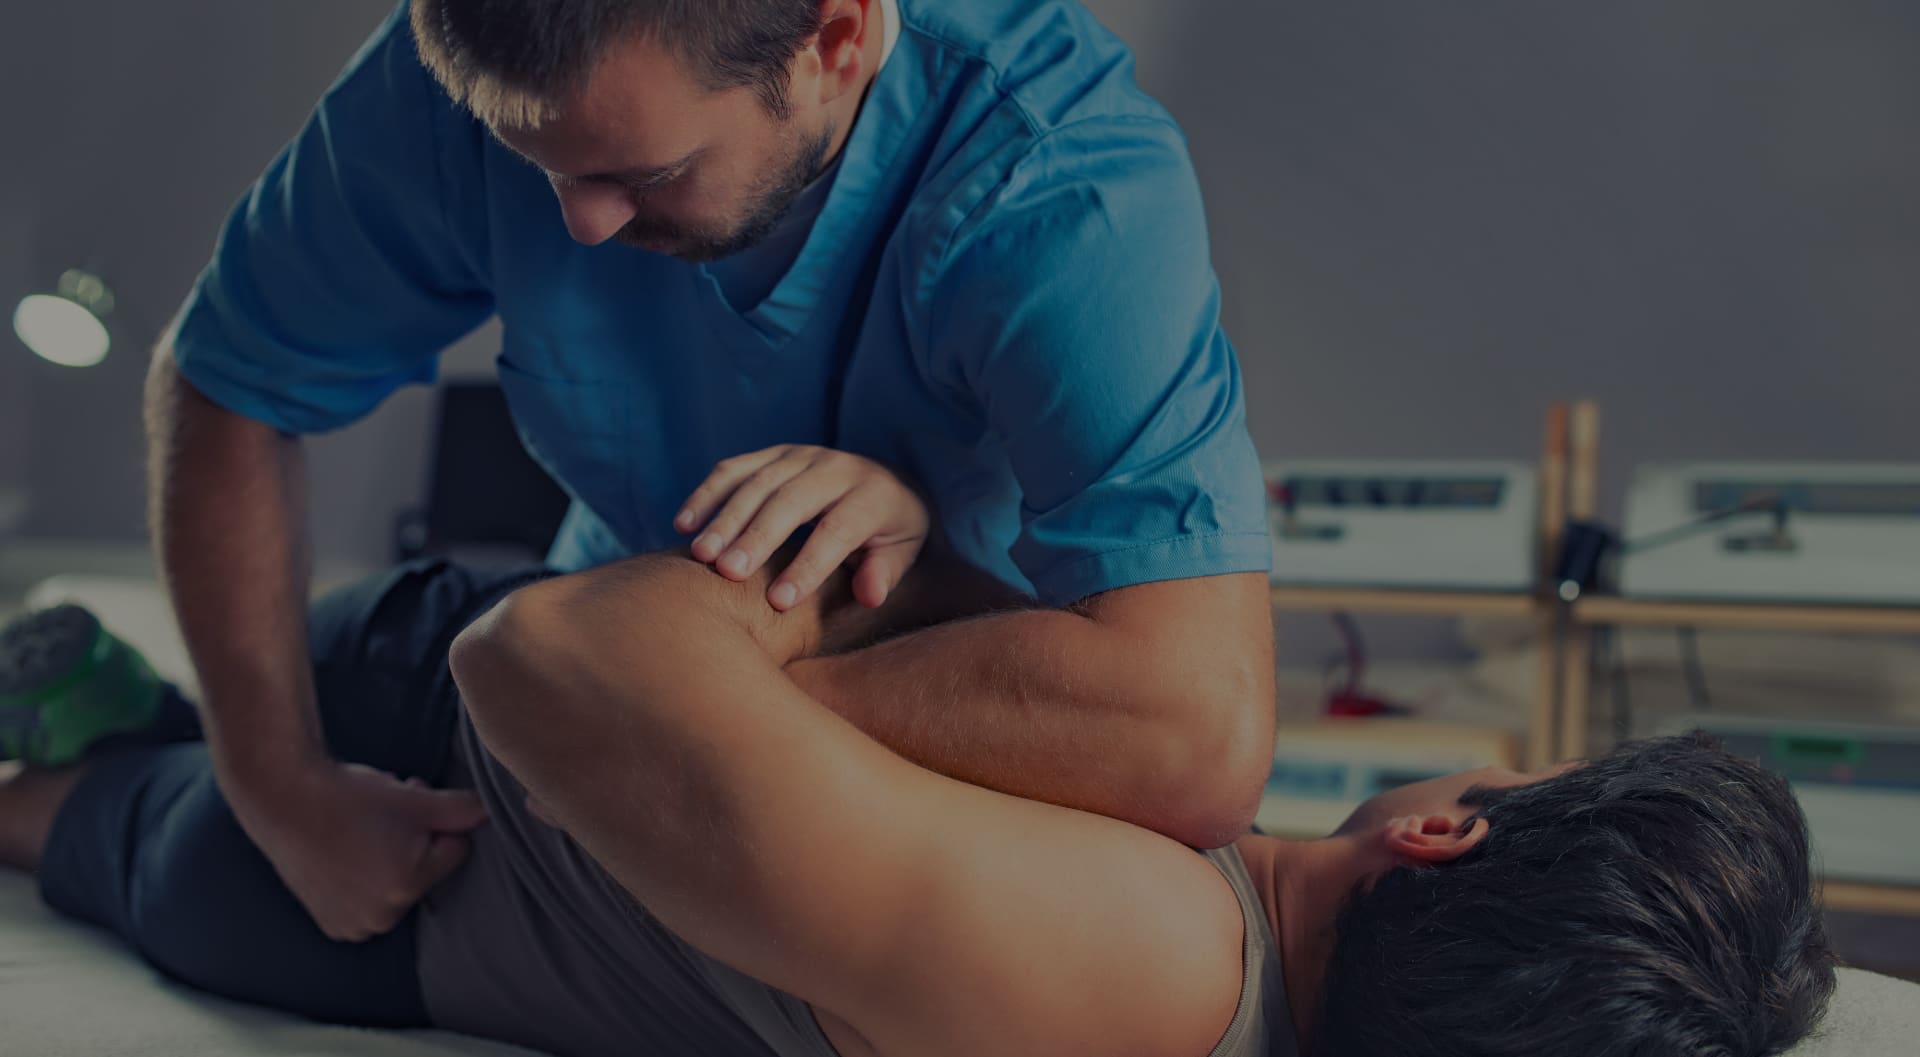 Chiropractor performing care